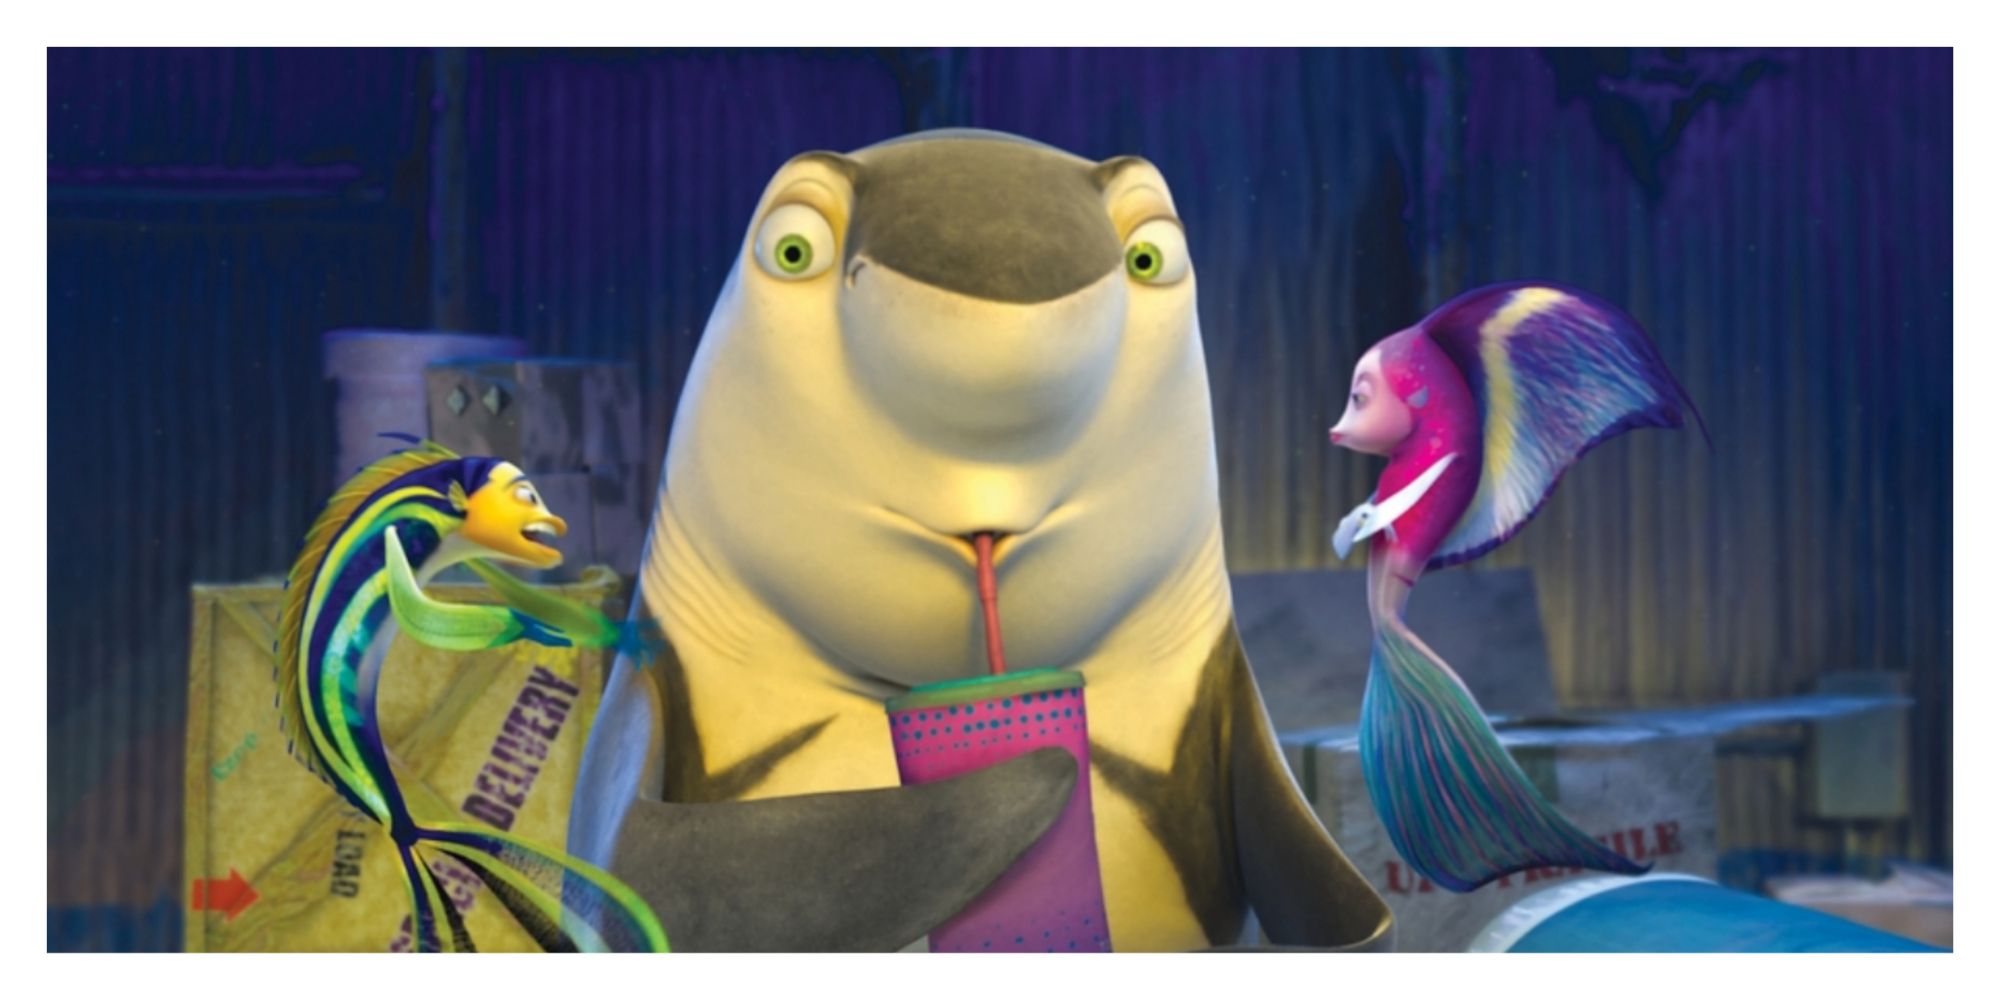 Jack Black, Will Smith, and Renee Zellweger's characters in Shark Tale